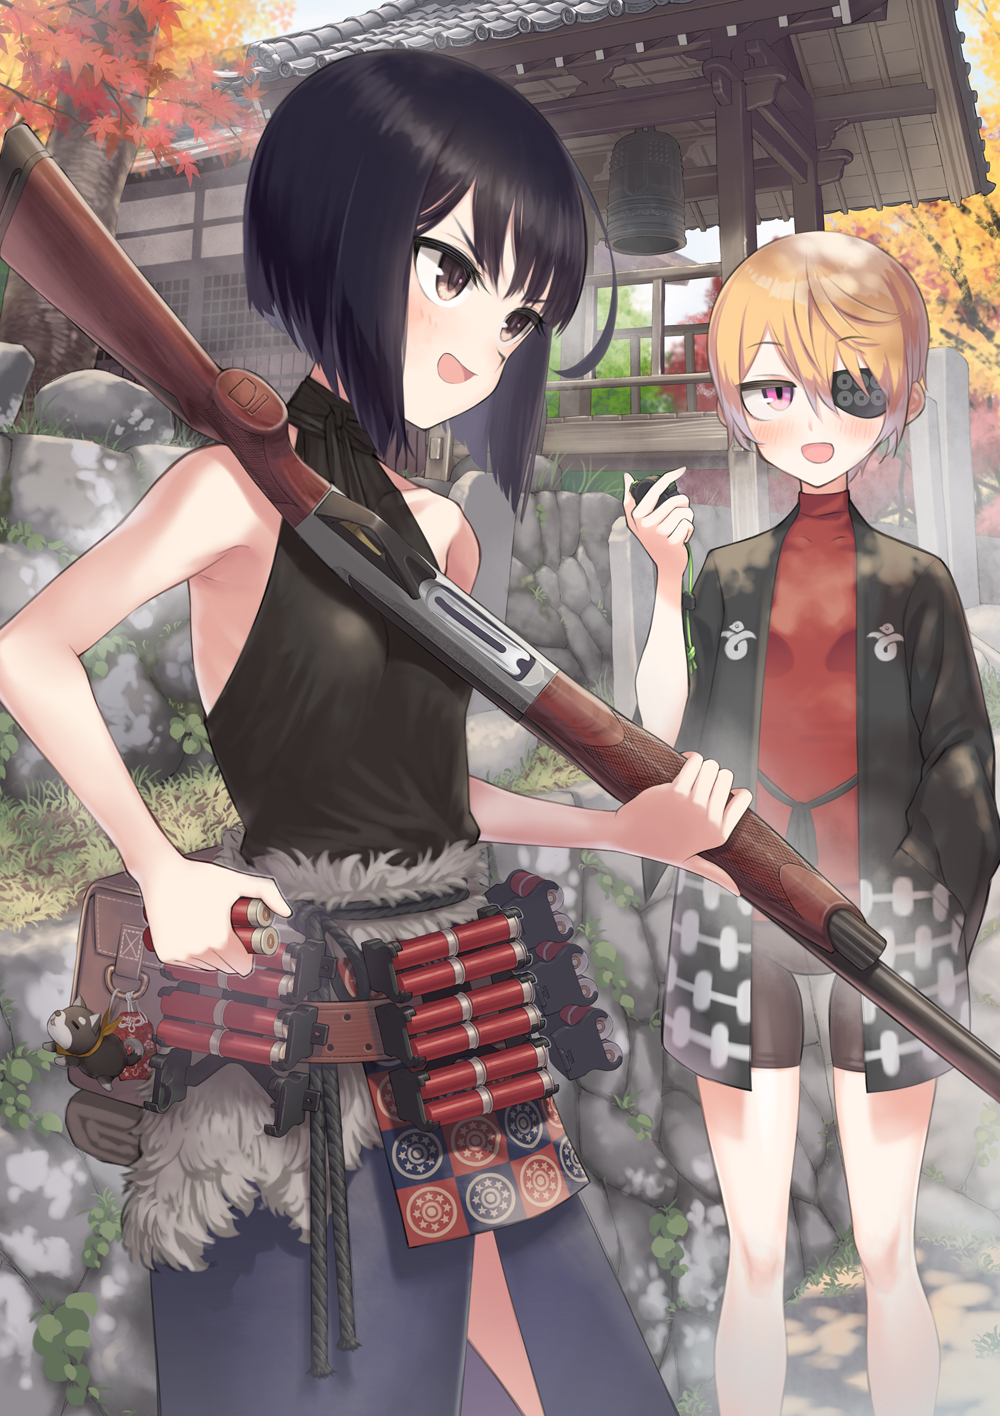 2girls :d ammunition_pouch architecture autumn_leaves bare_shoulders bell belt_pouch bike_shorts black_hair blonde_hair bob_cut brown_eyes commentary_request east_asian_architecture eyebrows_visible_through_hair eyepatch gun hand_in_pocket highres multiple_girls open_mouth original pouch reloading samaru_(seiga) short_hair shotgun shotgun_shells smile stopwatch tree very_short_hair violet_eyes watch weapon weapon_request